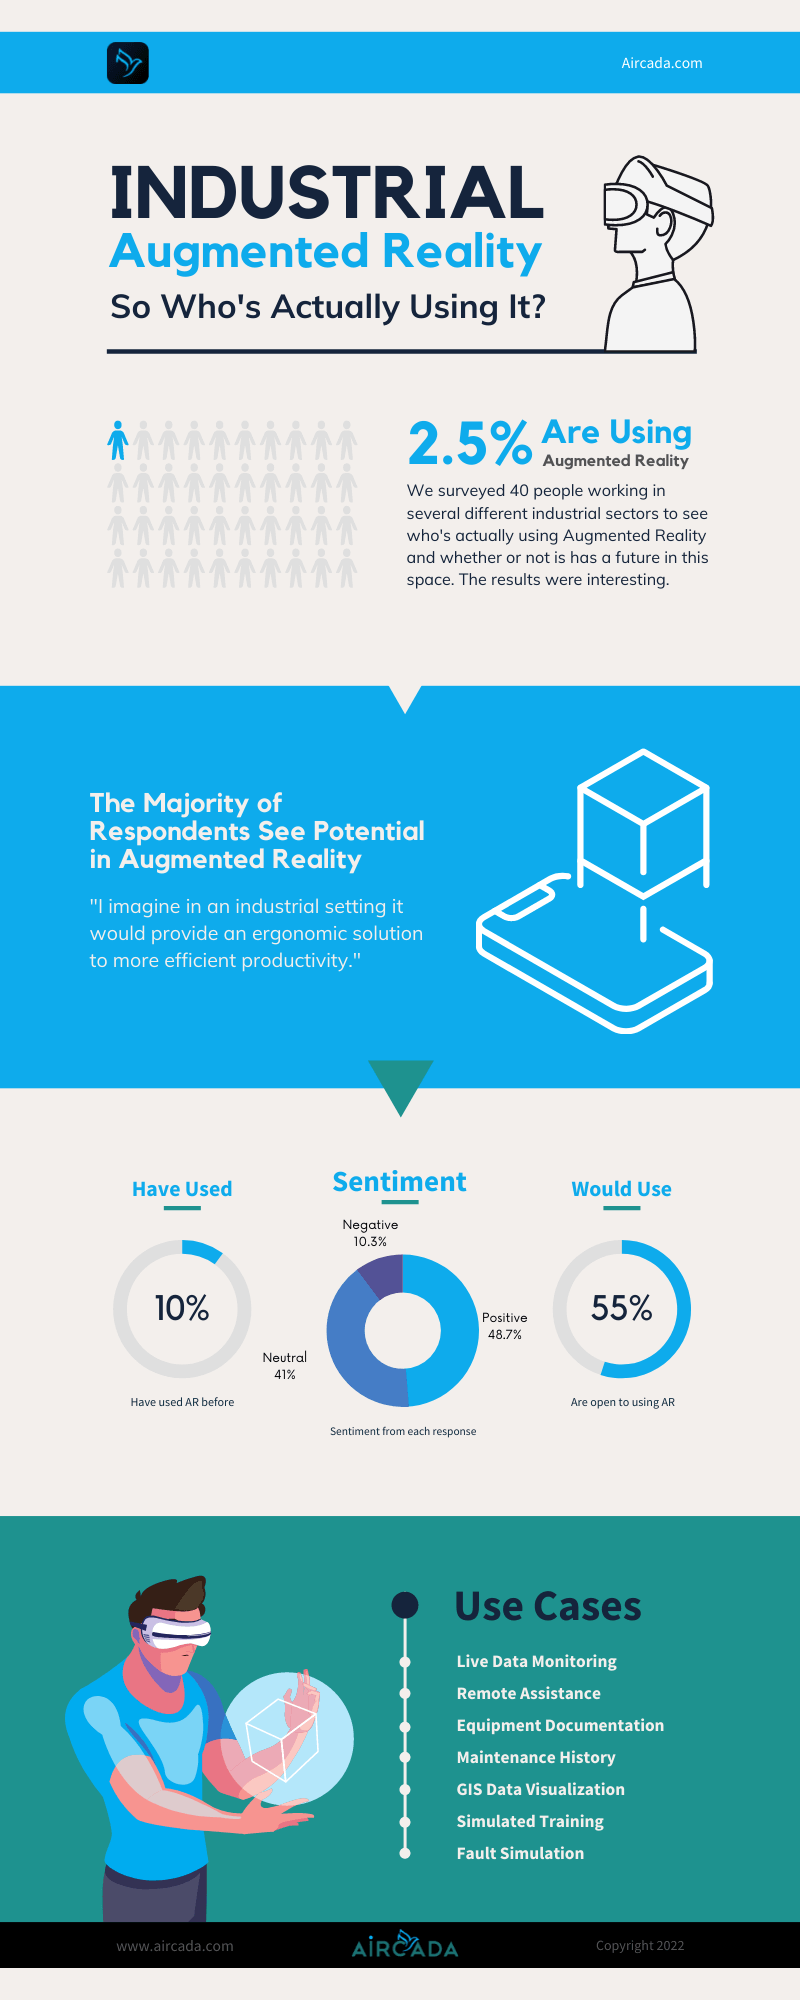 Industrial augmented reality infographic